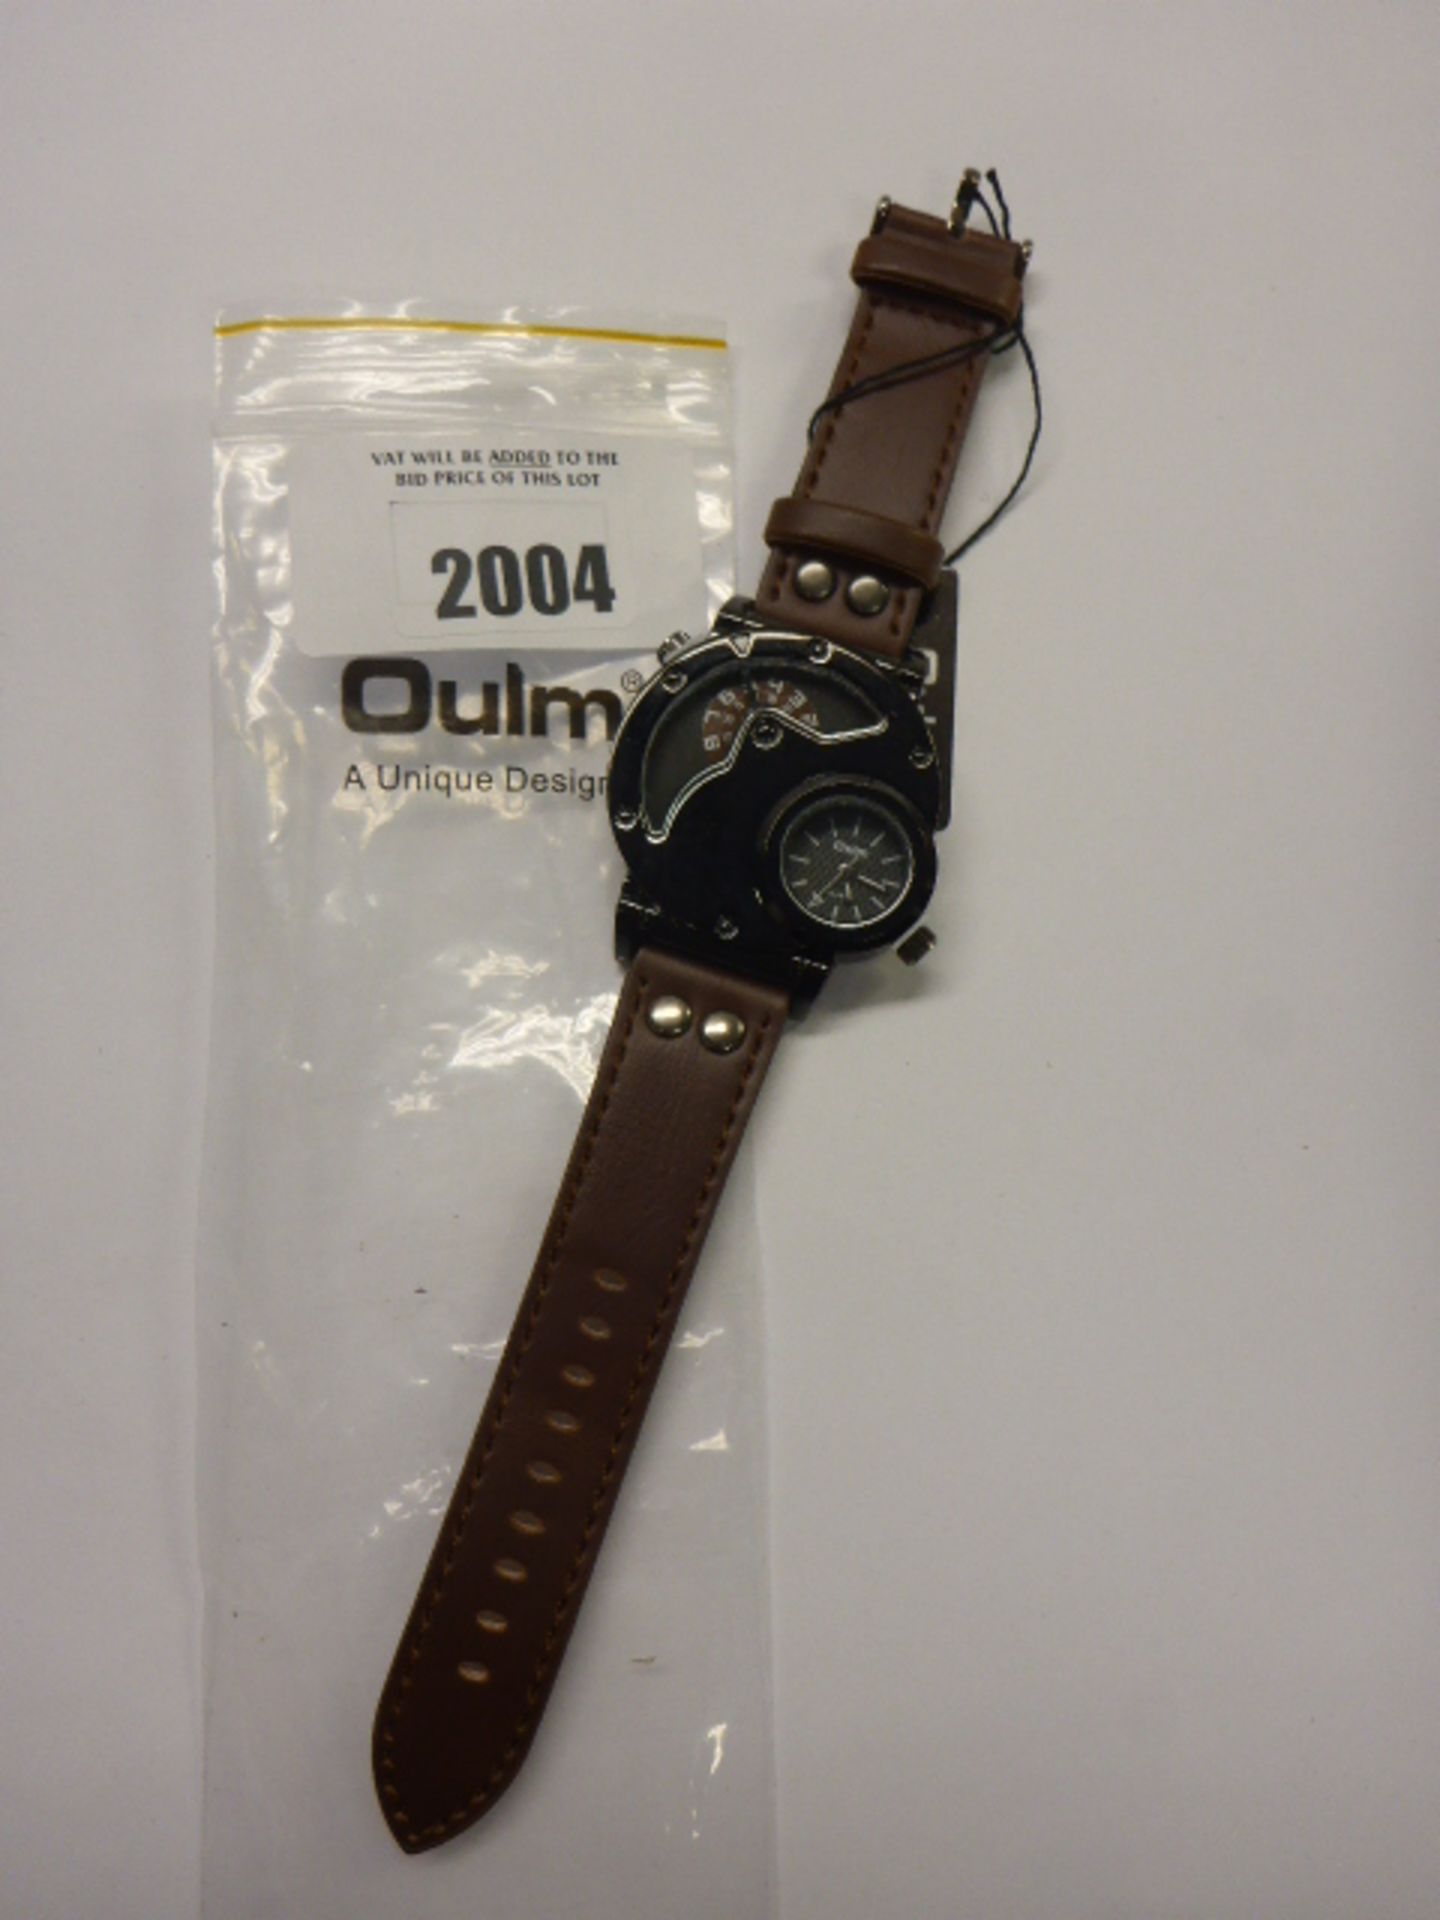 Oulm Design Gents oversized watch.